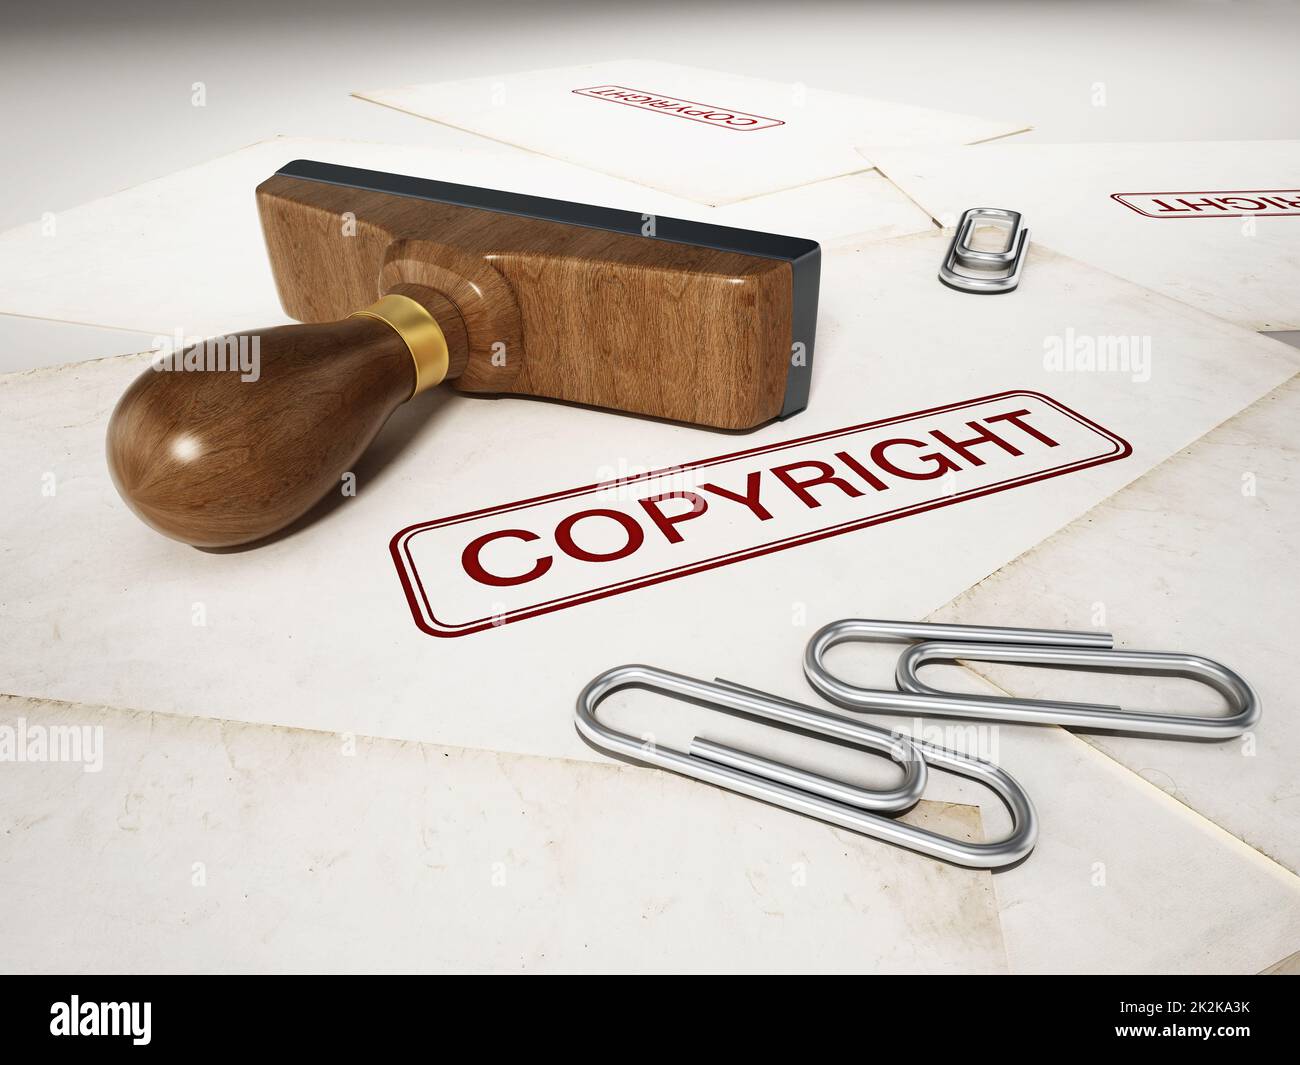 Copyright stamp standing on documents. 3D illustration Stock Photo